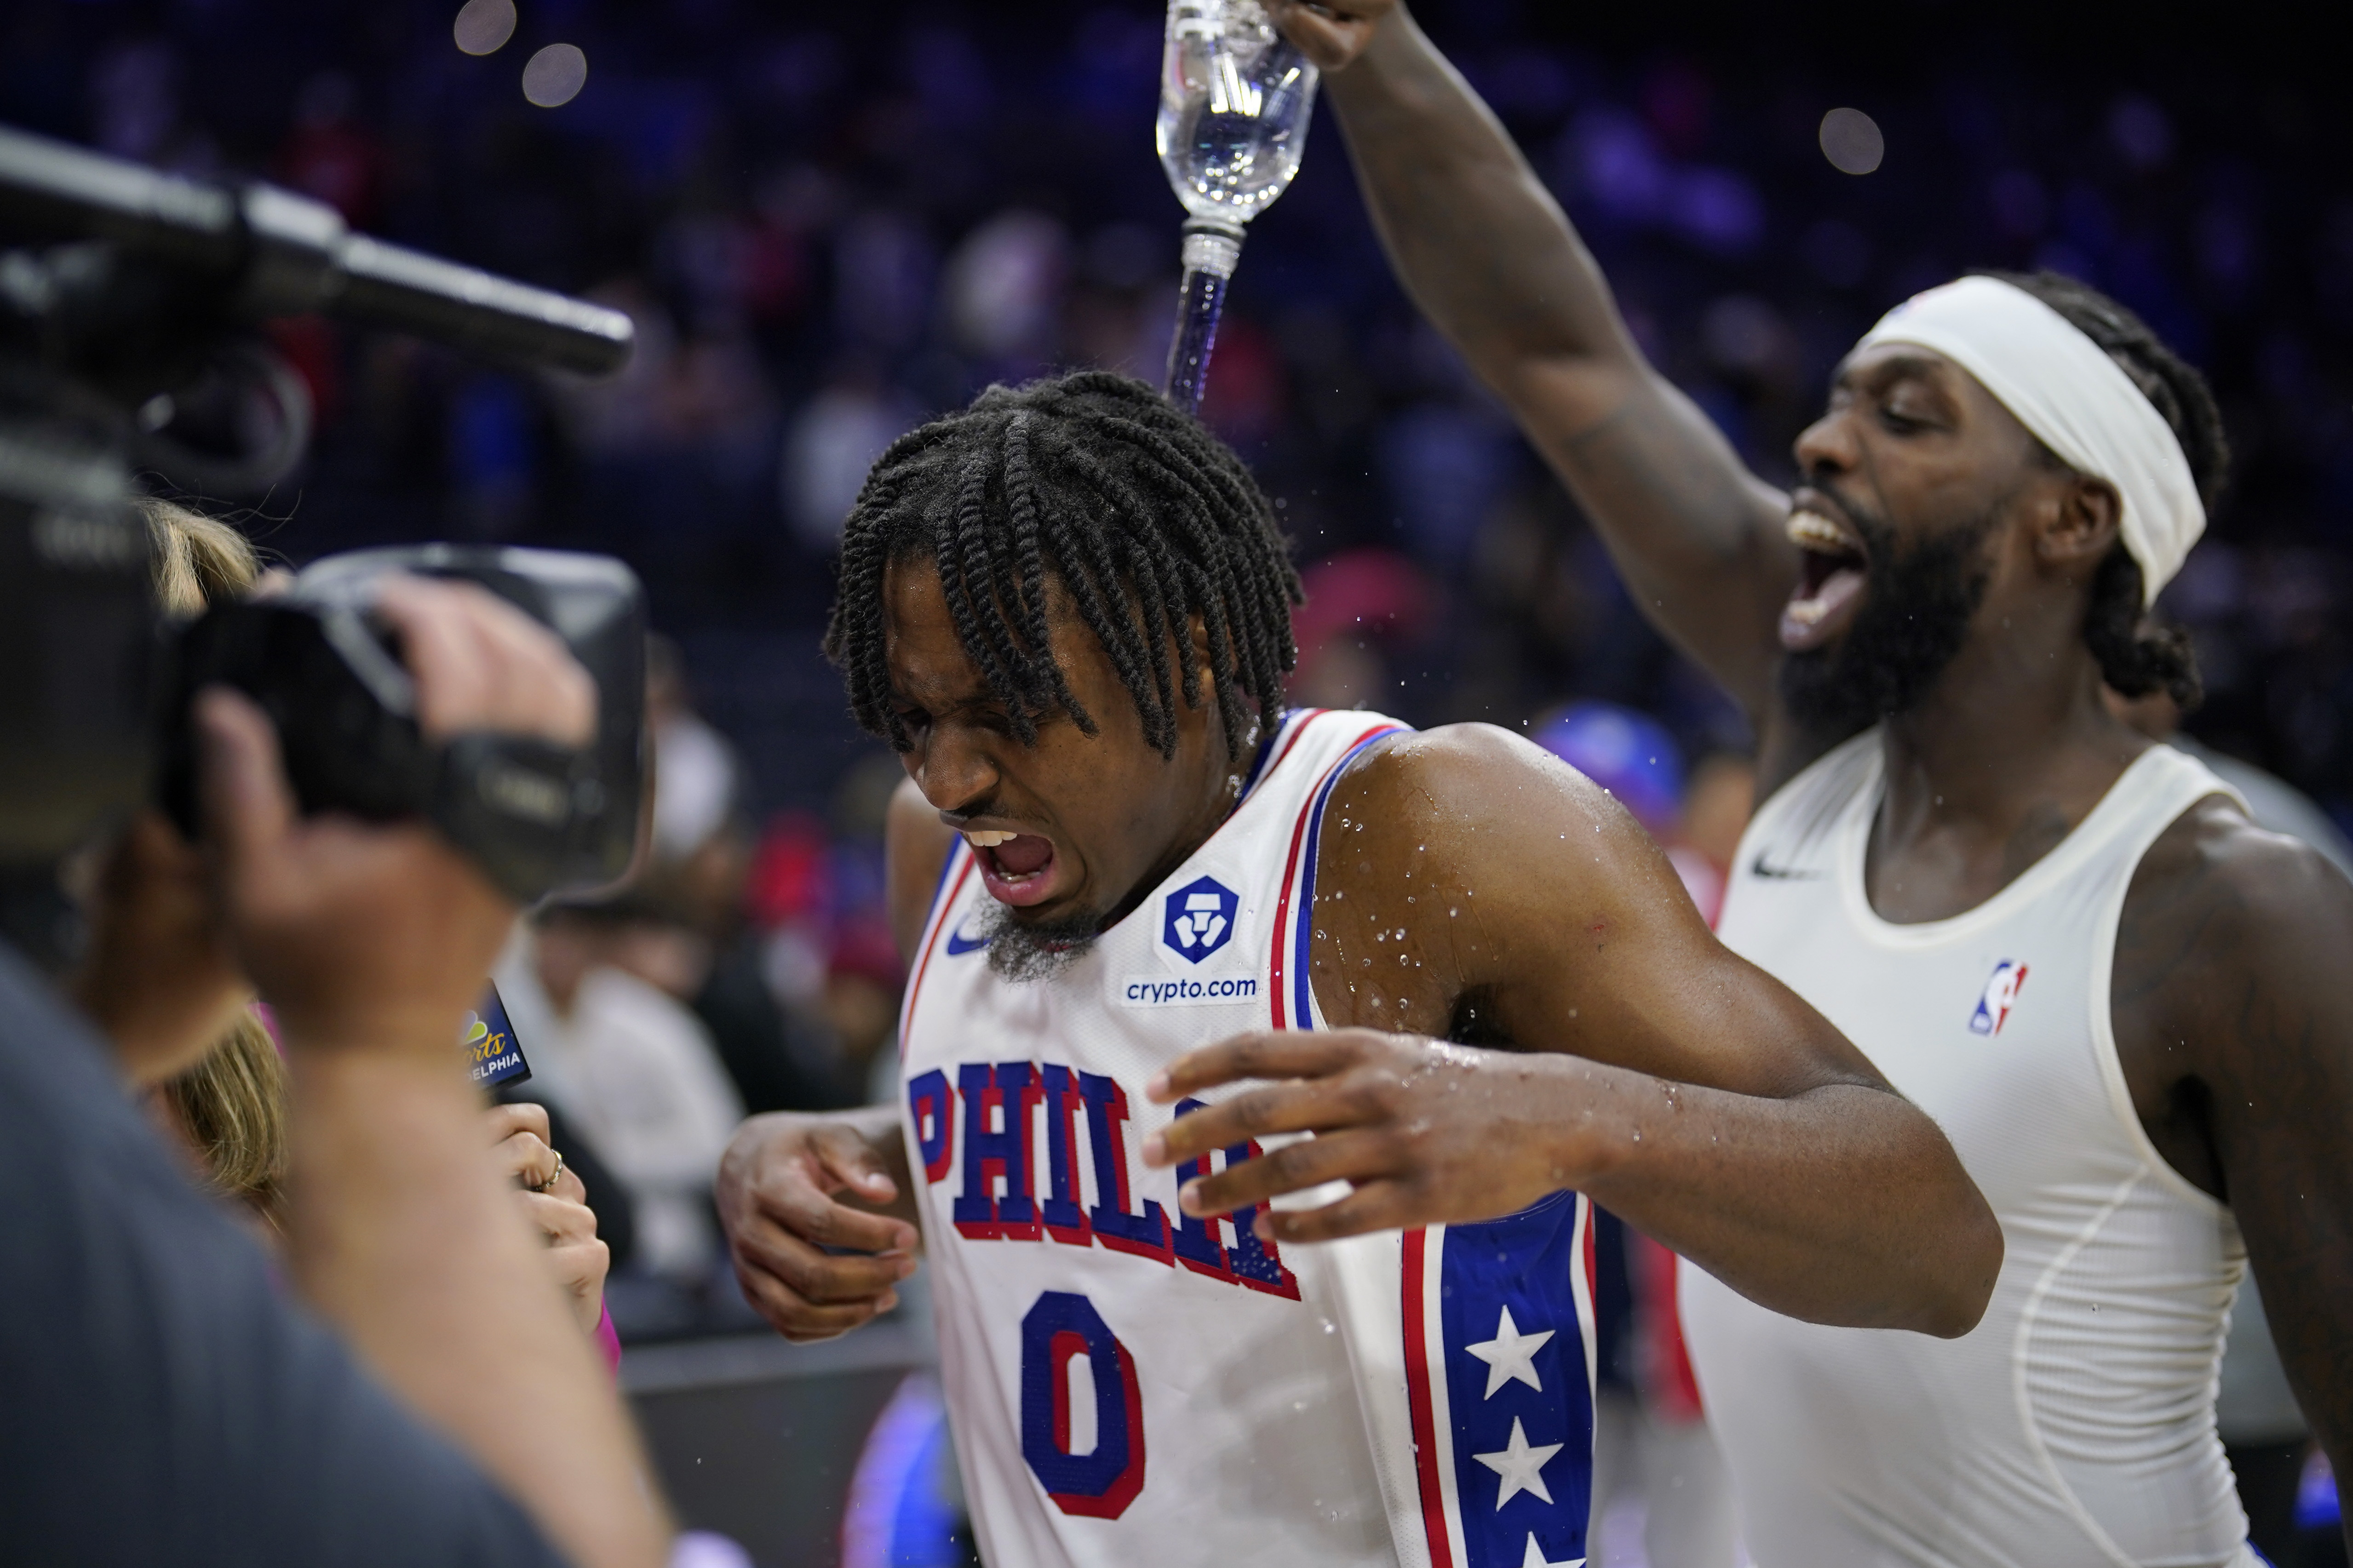 76ers still falling short, 10 years after trusting The Process